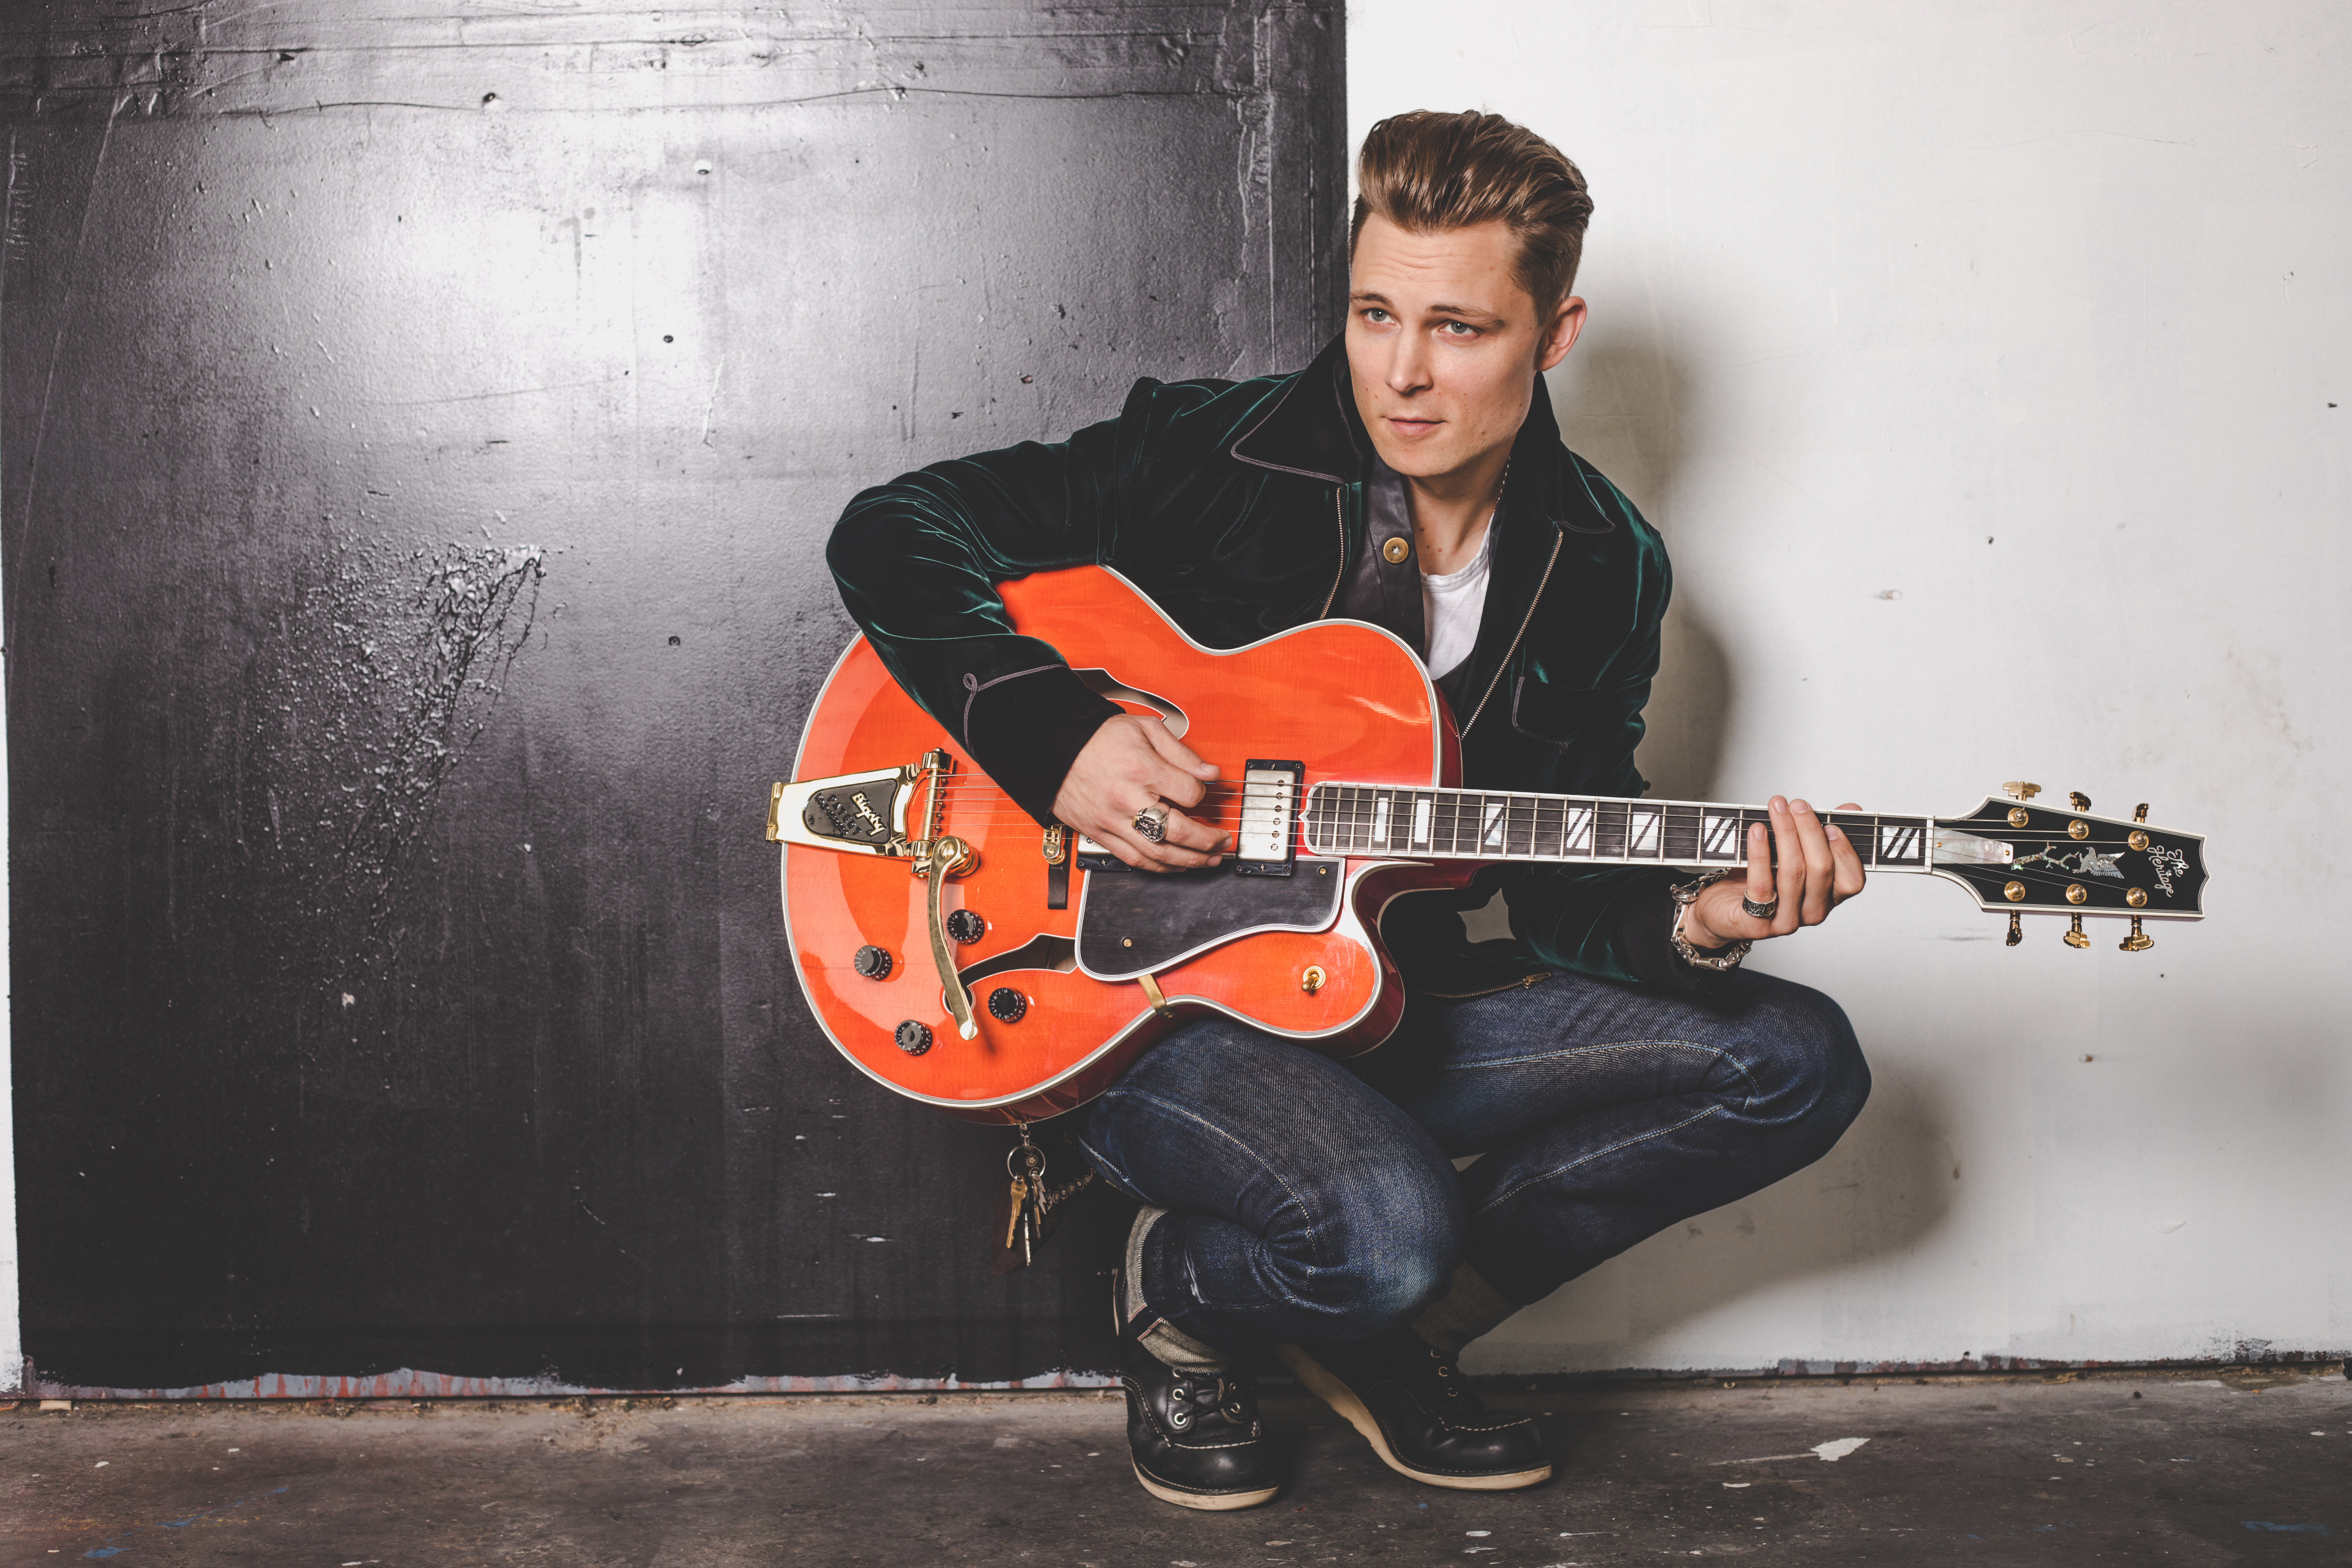 Michigan-Born Country Music Star Frankie Ballard to Perform Saturday, June 1 at the Chevrolet Detroit Grand Prix presented by Lear